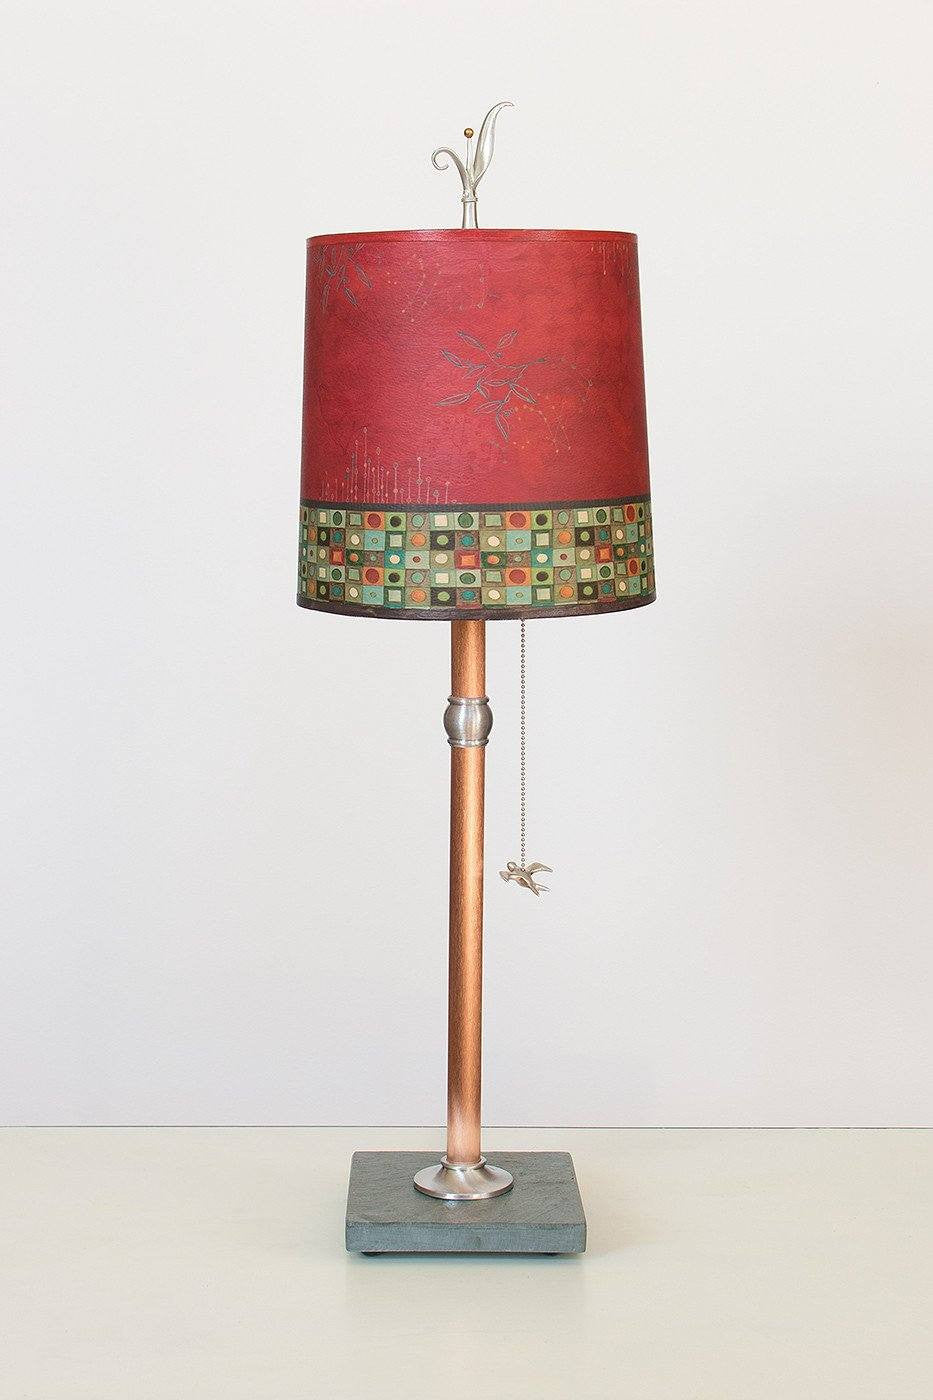 Janna Ugone &amp; Co Table Lamps Copper Table Lamp with Medium Drum Shade in Red Mosaic